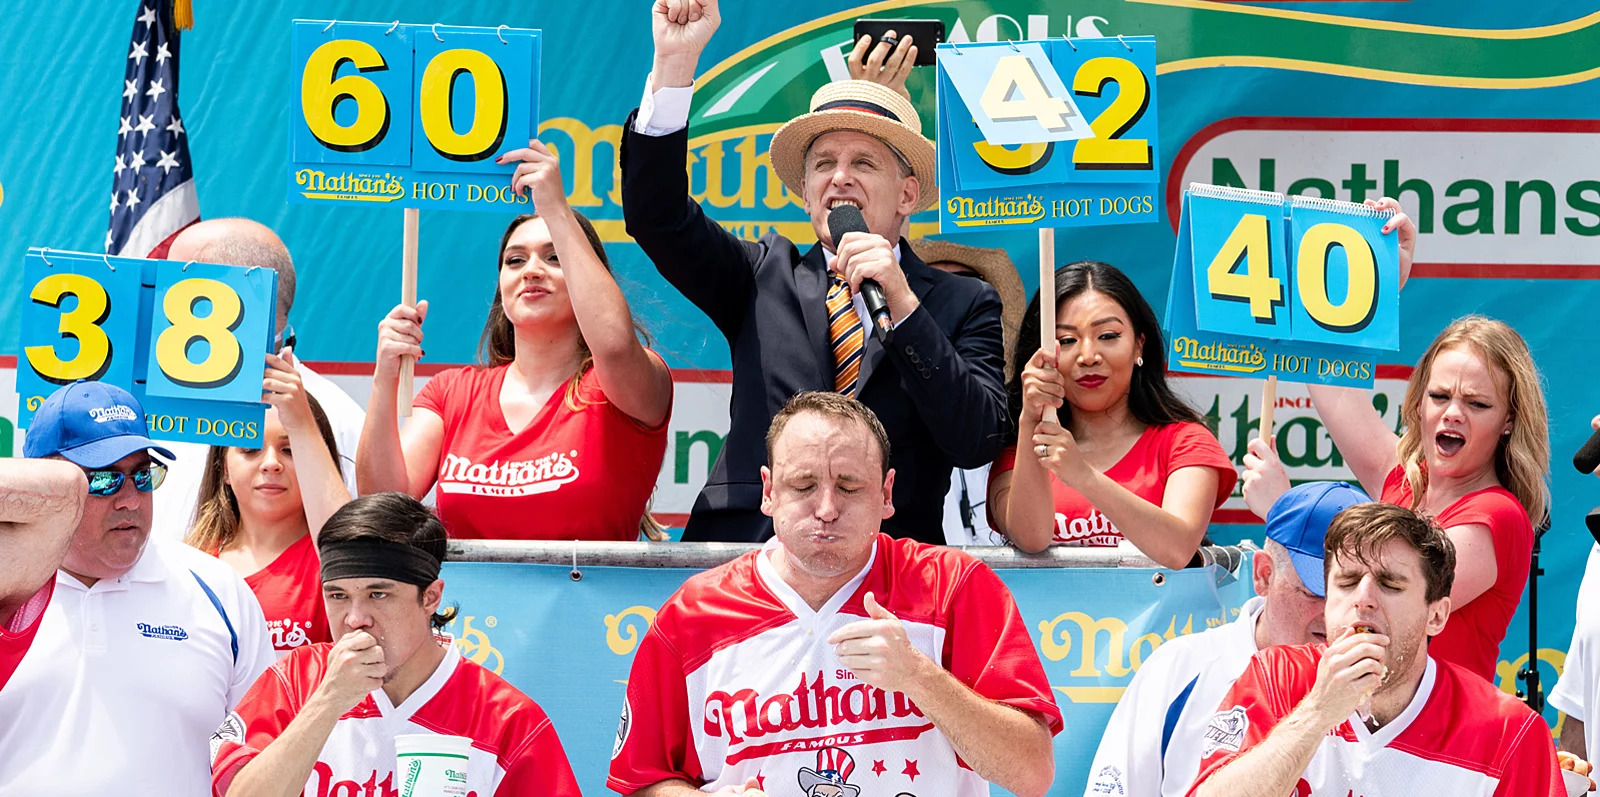 Competitive Eating Contest and Other Sports are Approved by New Jersey Senate Committee